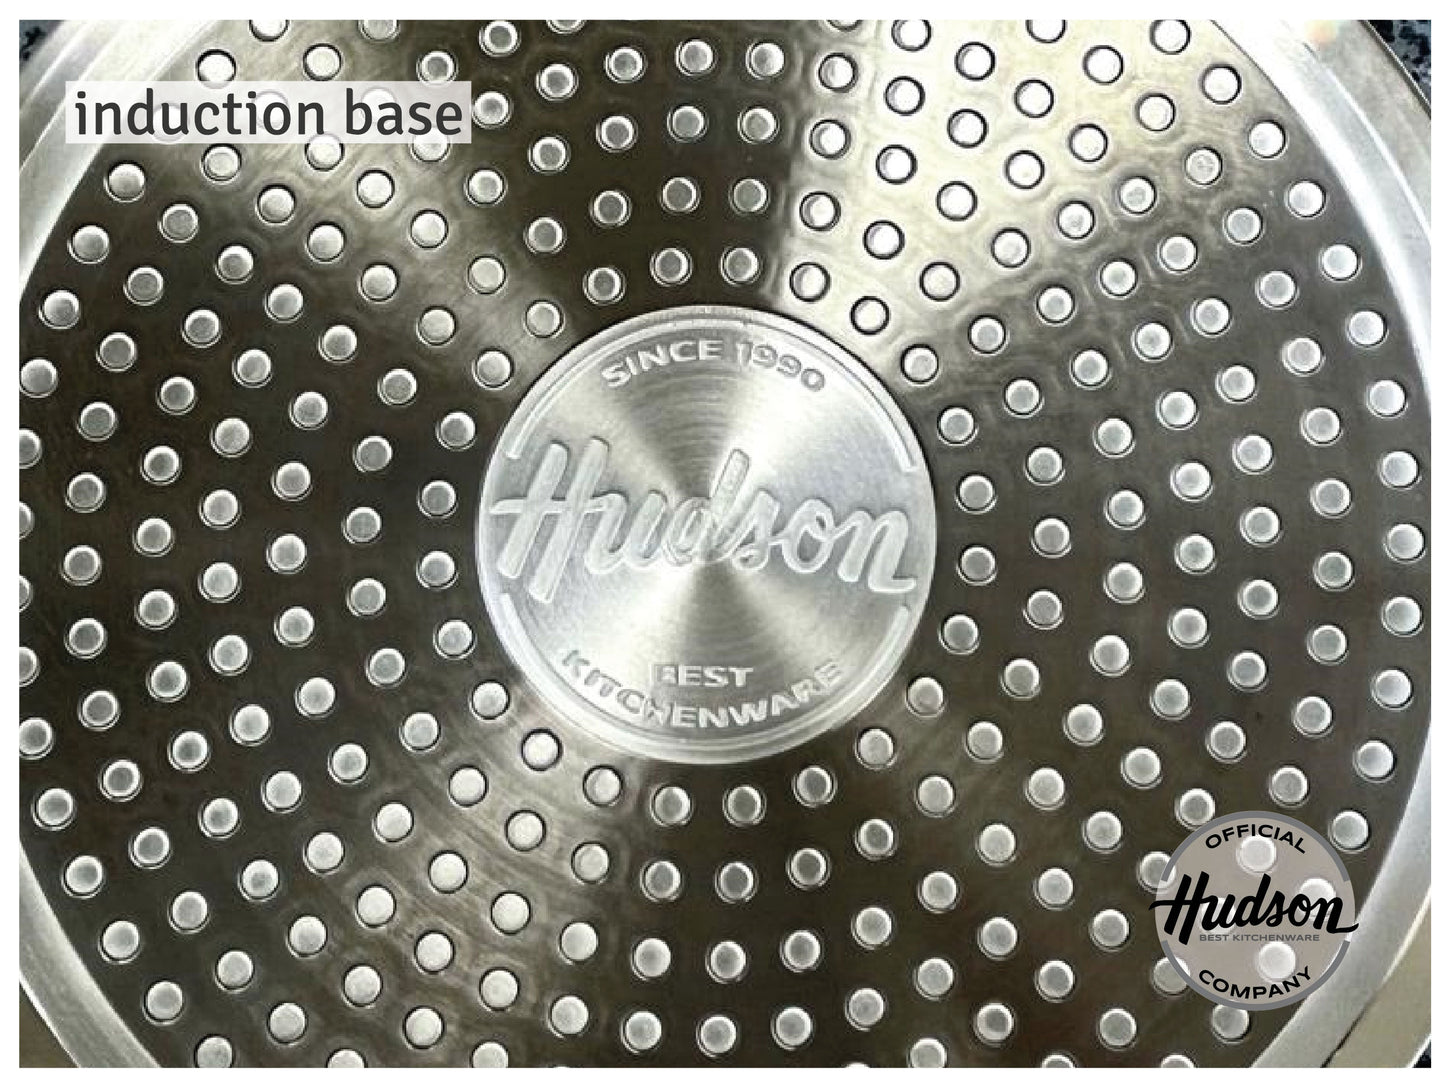 HUDSON Forged Nonstick Grey Frying Pan 2.6Qt Cookware, Pots and Pans, Dishwasher Safe